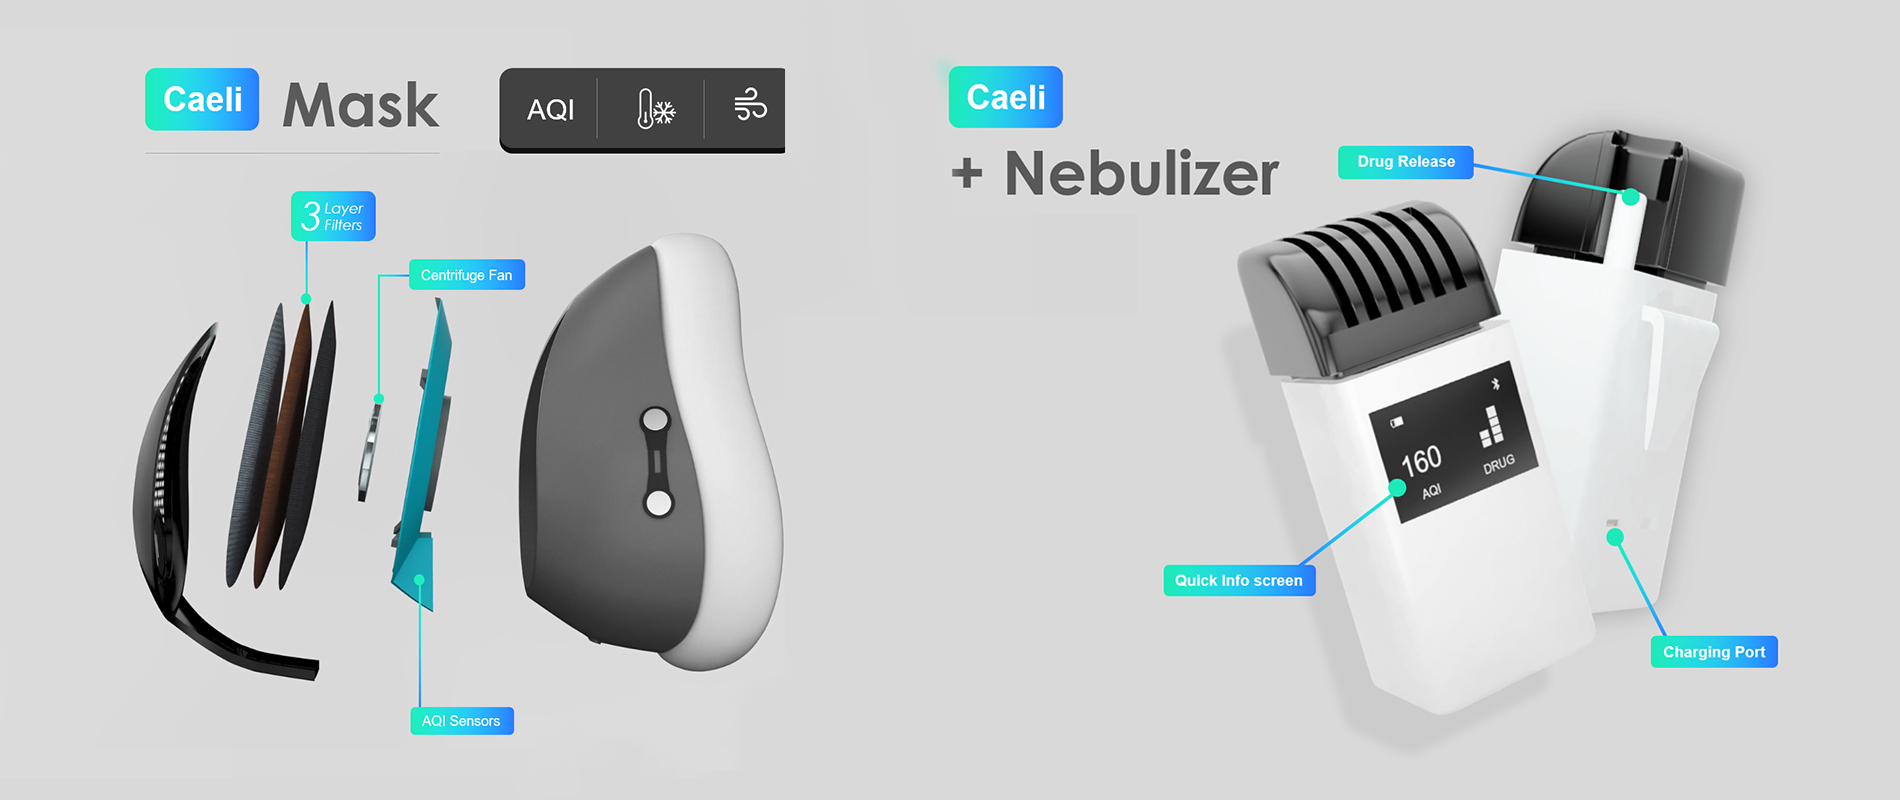 Team Caeli's smart anti-pollution face mask and nebulizer